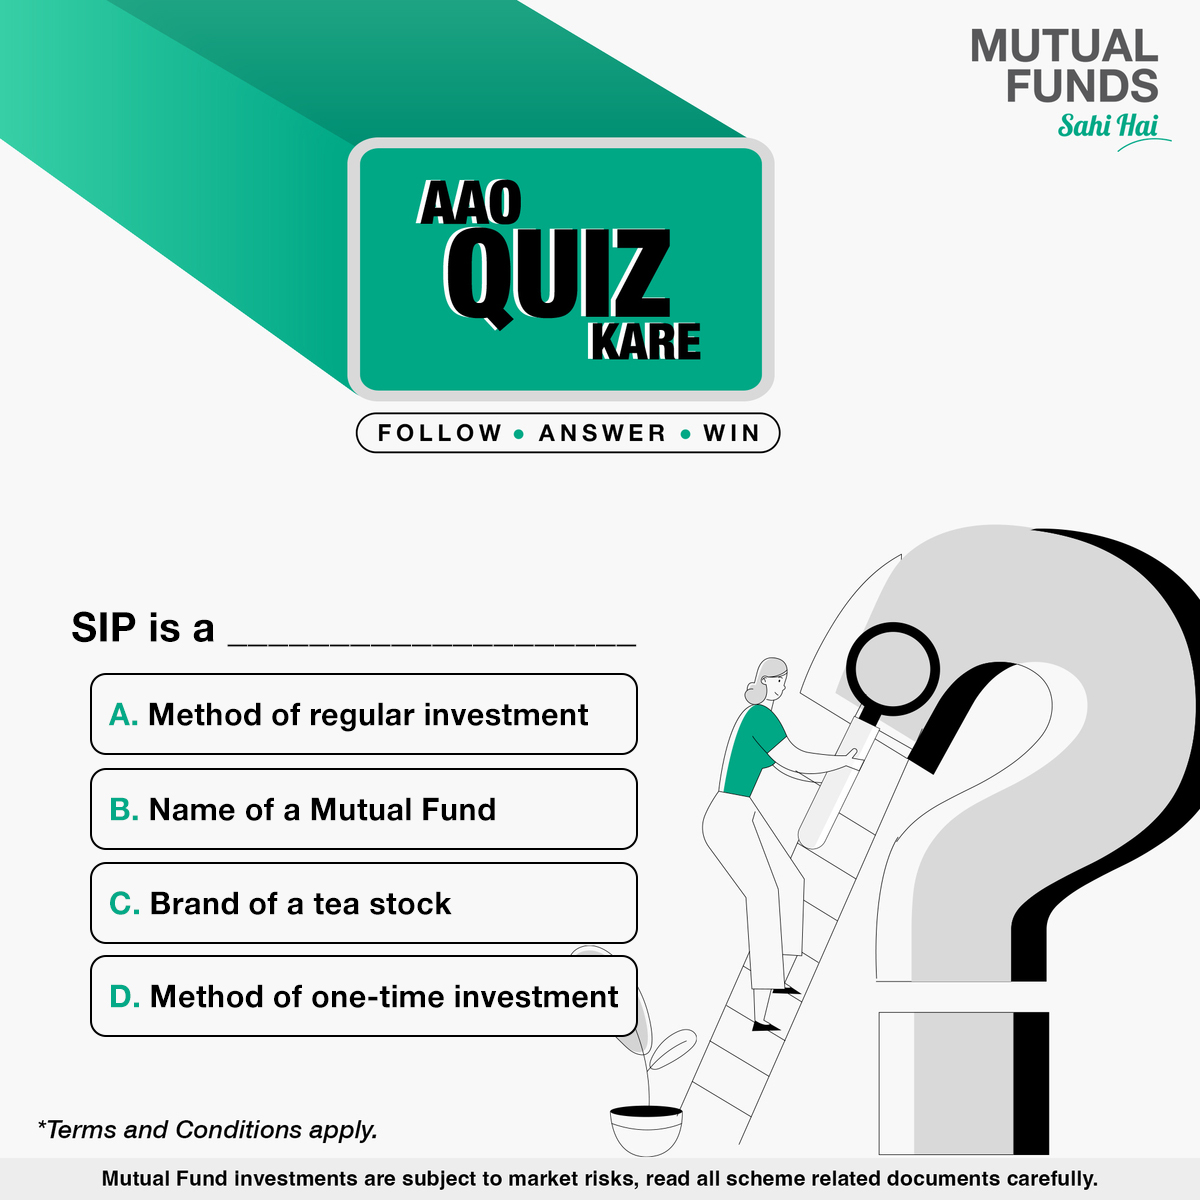 Are you ready to take up this challenge? Follow us, answer the question correctly, and share a screenshot of following us. To know more: ​ bit.ly/3SObffz T&C Apply: ​​bit.ly/495q04q #MutualFundsSahiHai #AaoQuizKare #Investment #SIP #MutualFunds #ContestAlert